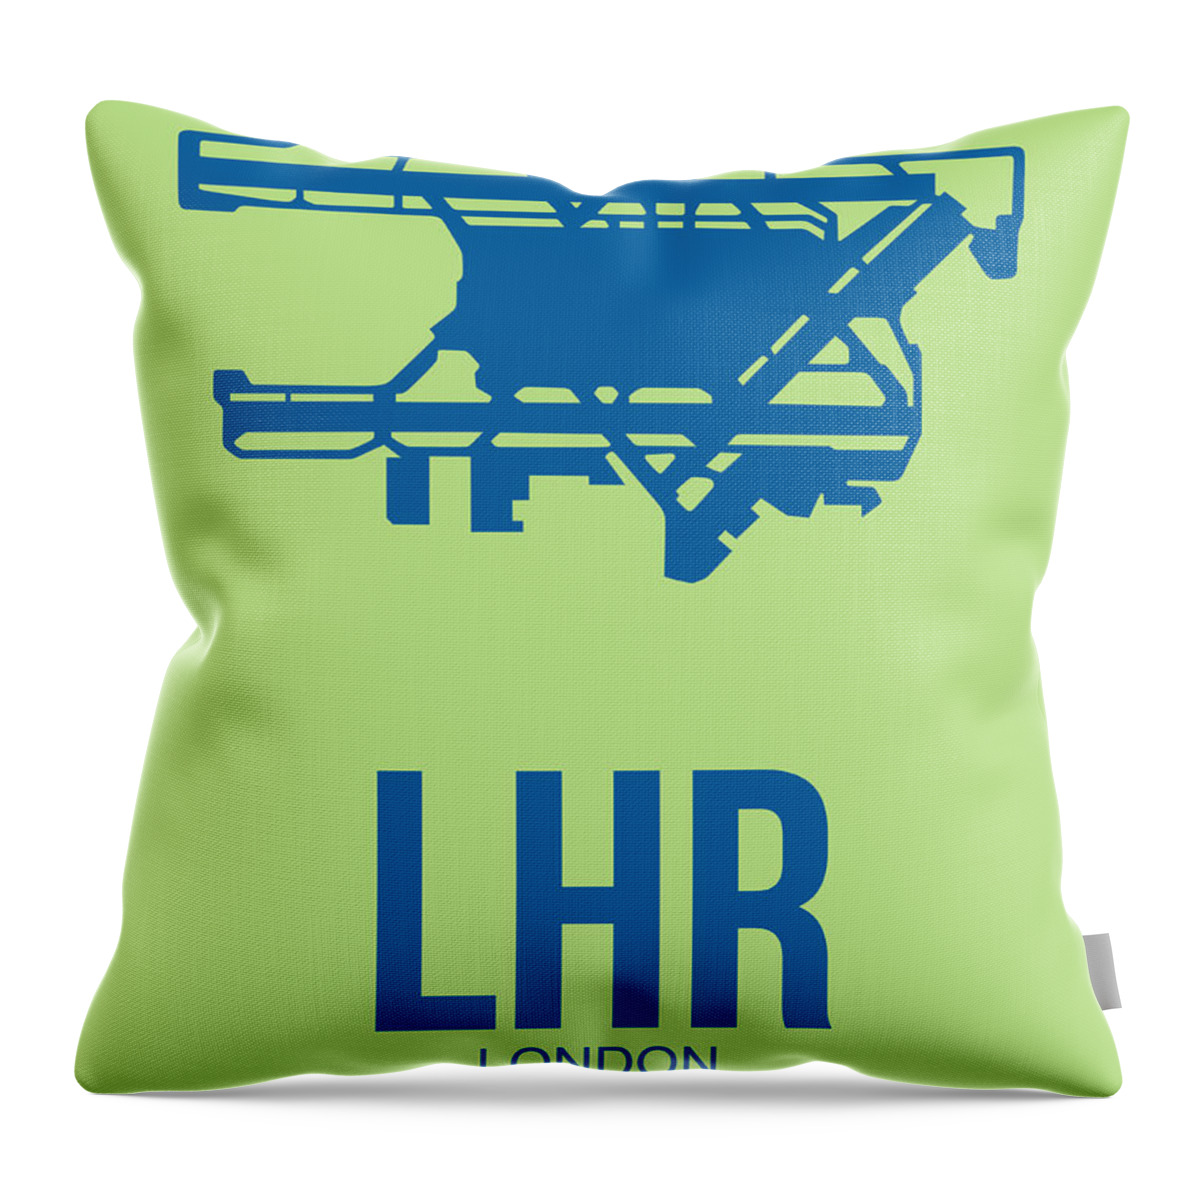 London Throw Pillow featuring the digital art LHR London Airport Poster 2 by Naxart Studio